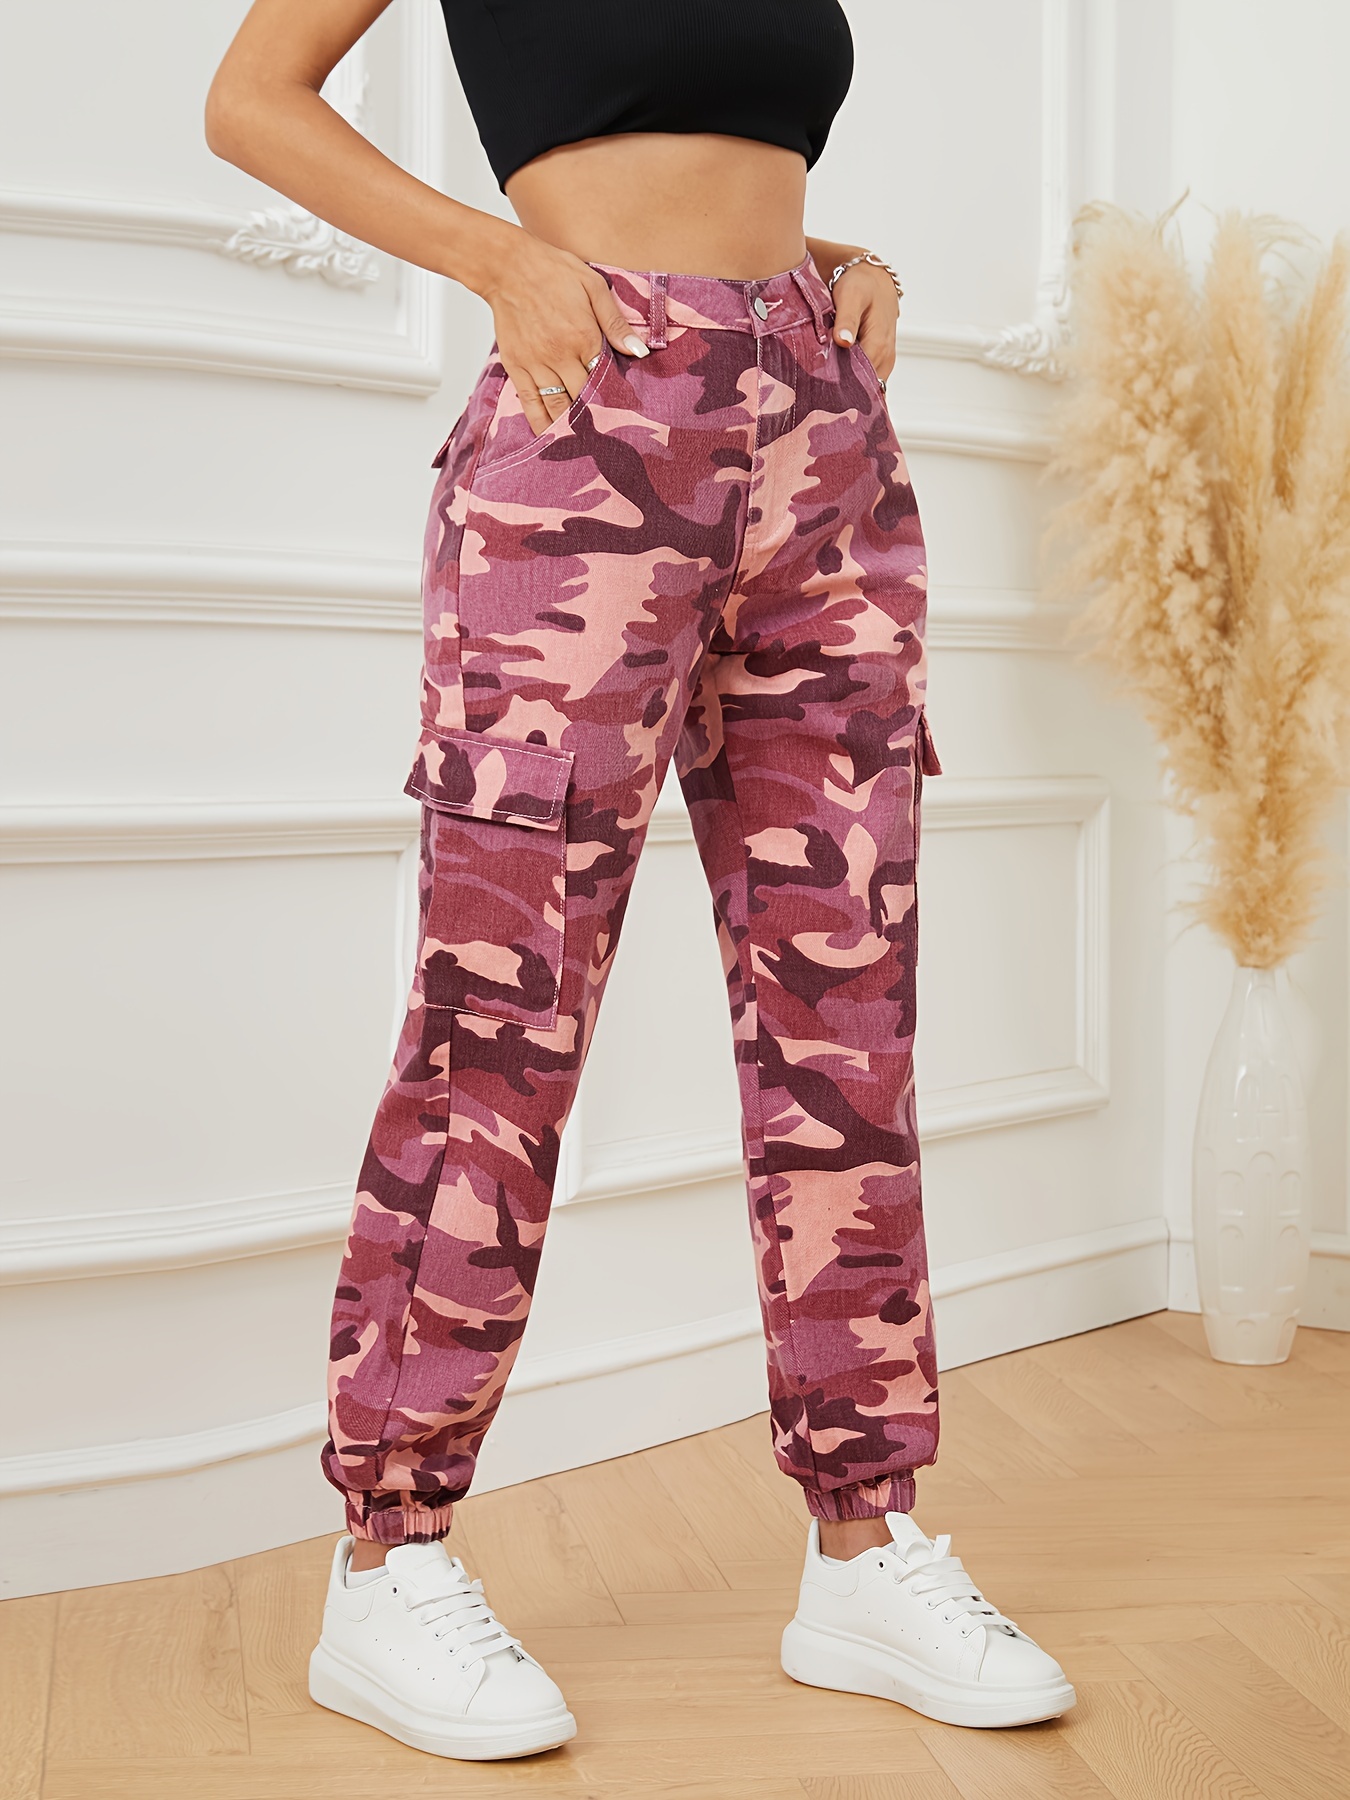 NEW Girls Pink Camo Camouflage Tracksuit Crop Top Leggings